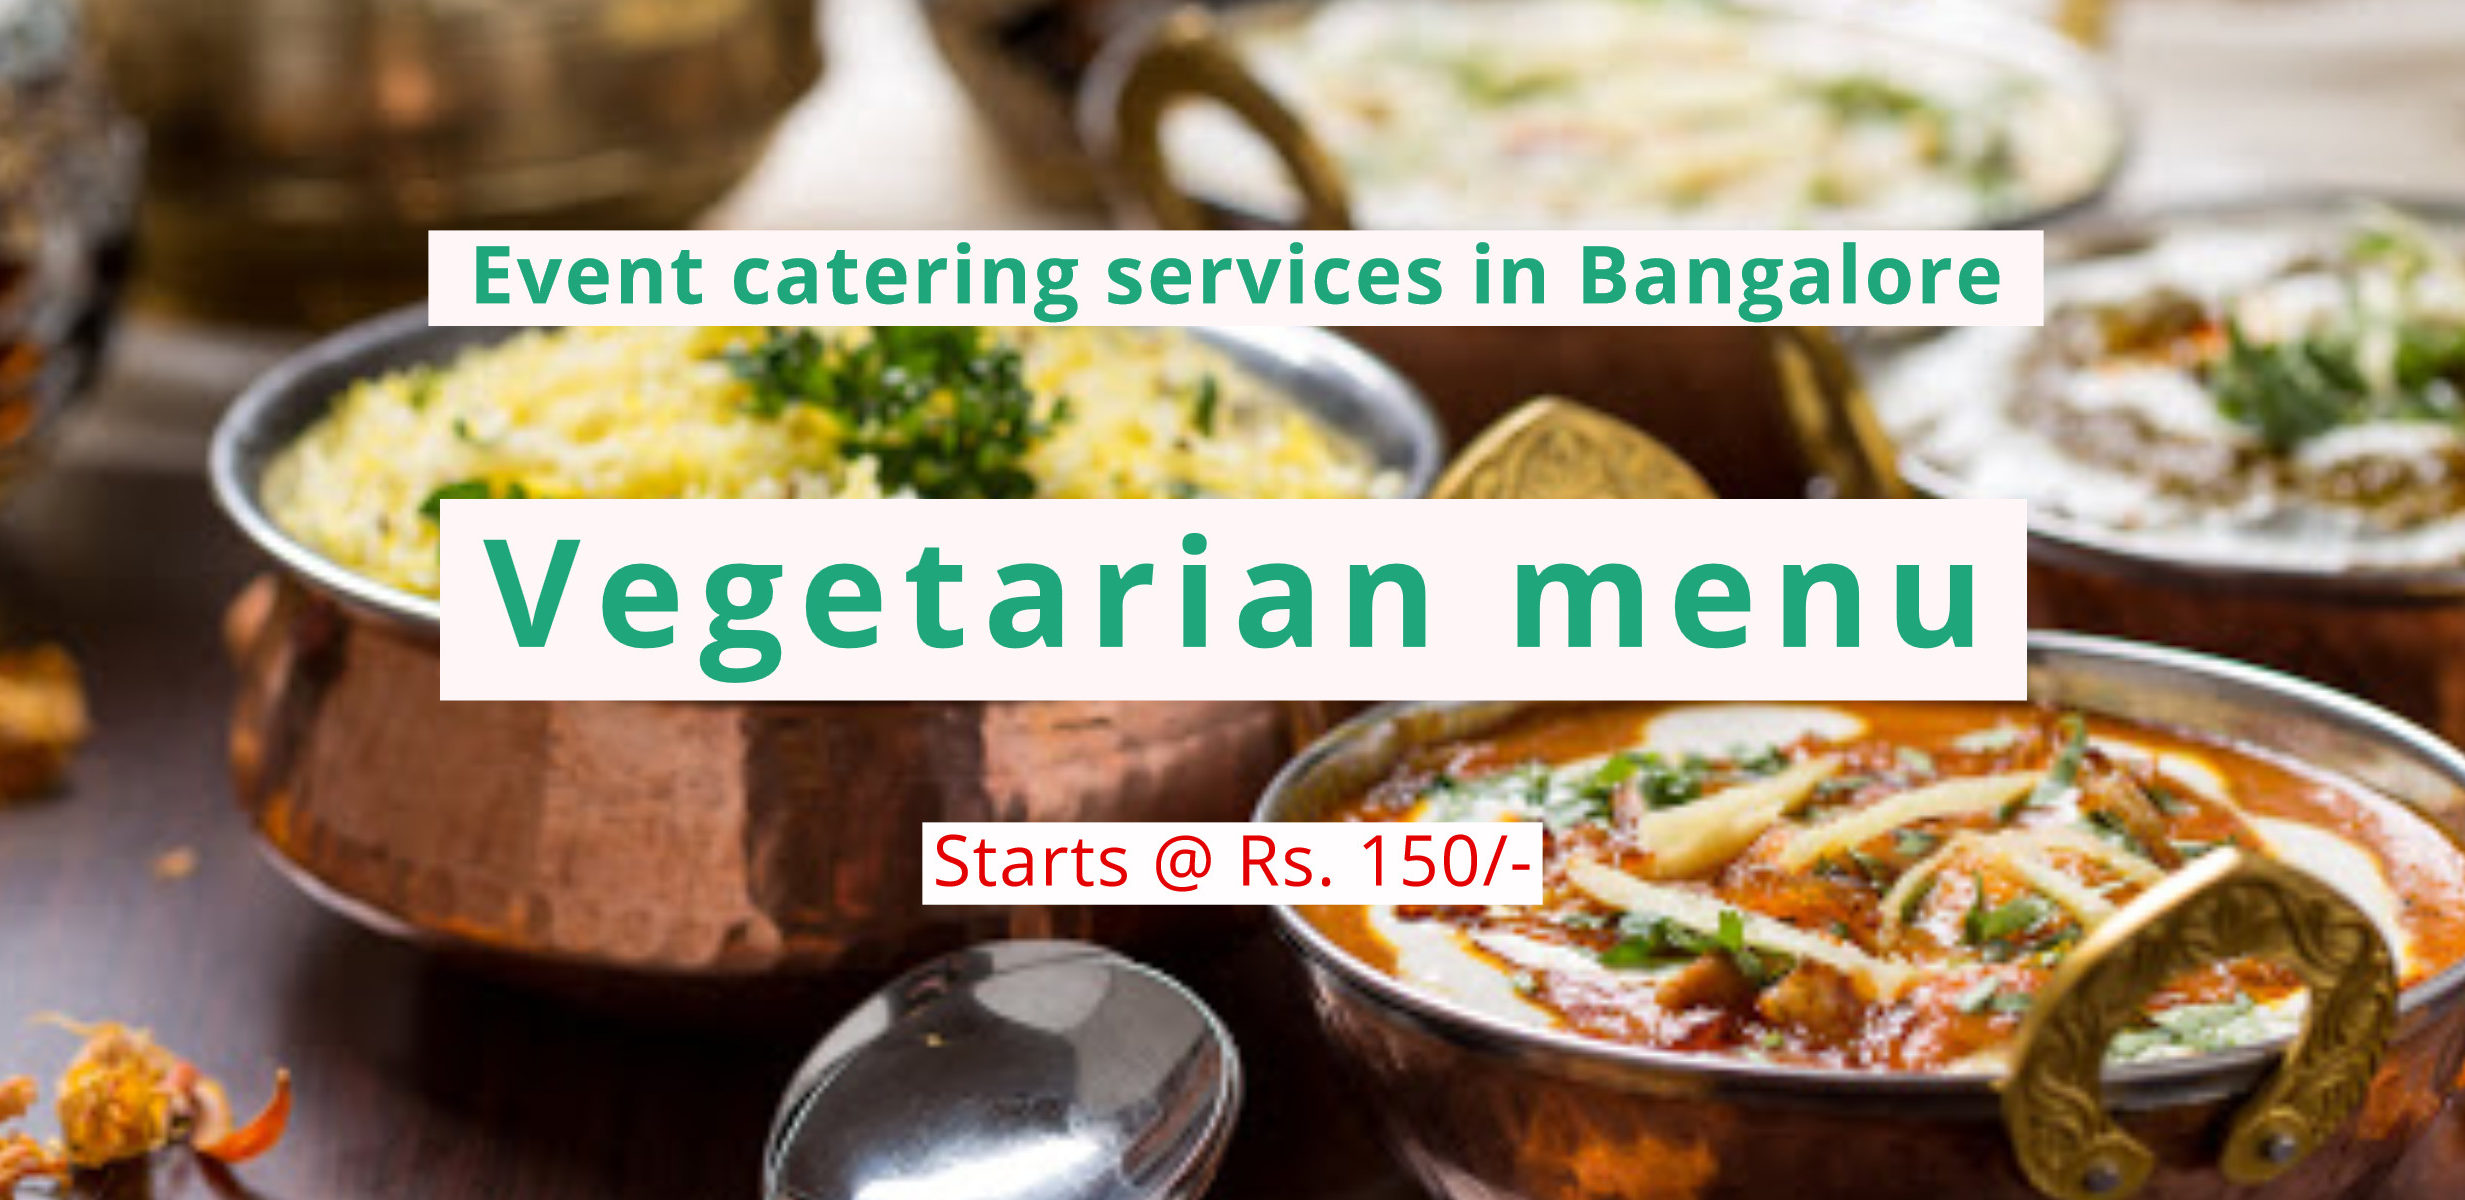 Catering services Bangalore - Catering services in Bangalore, Best caterers in Bangalore